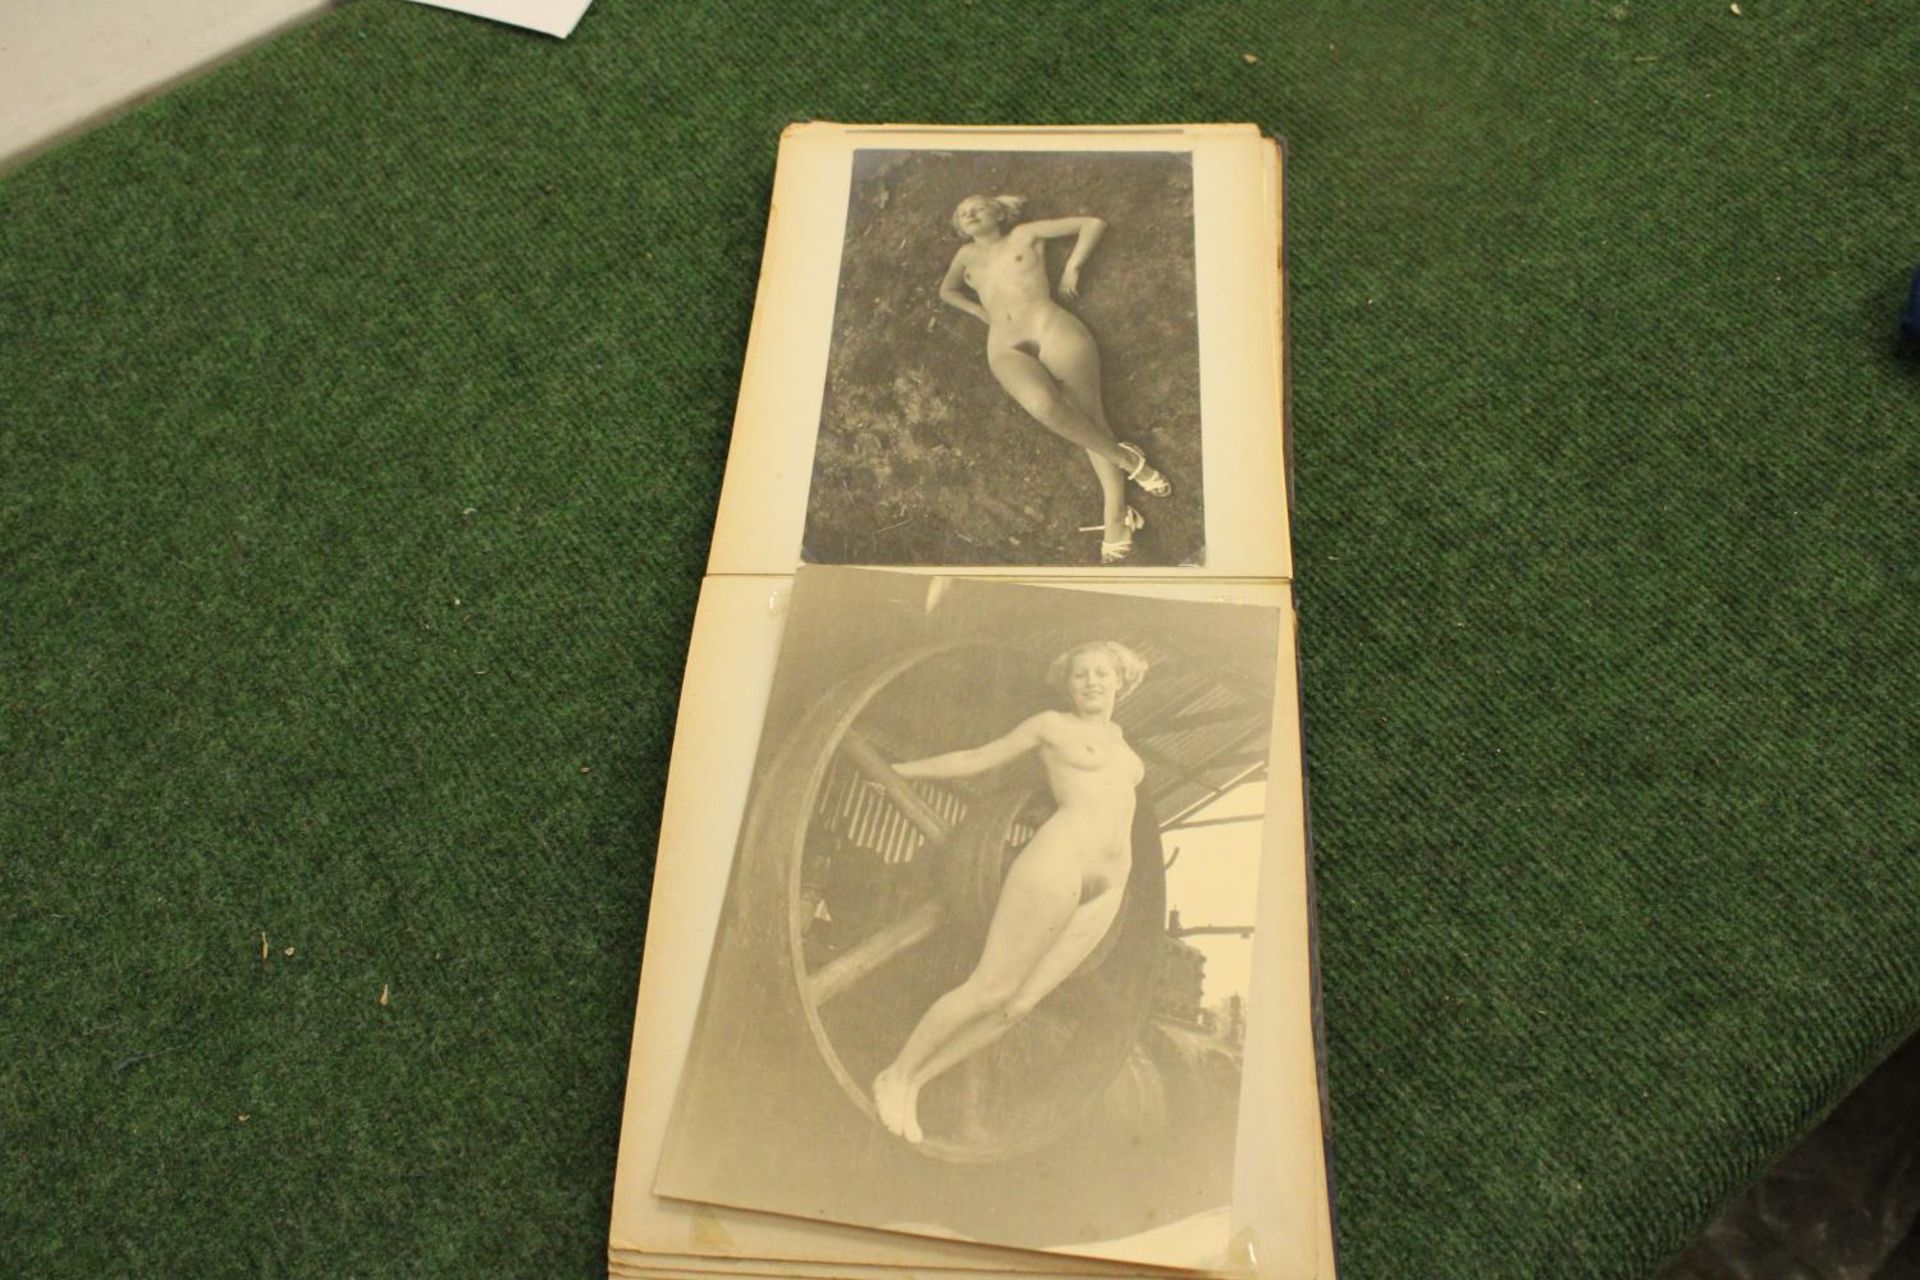 A RARE ALBUM CONTAINING BLACK AND WHITE PHOTOGRAPHS TAKEN IN THE 1920'S/30'S OF WOMEN POSING NUDE. - Image 7 of 9